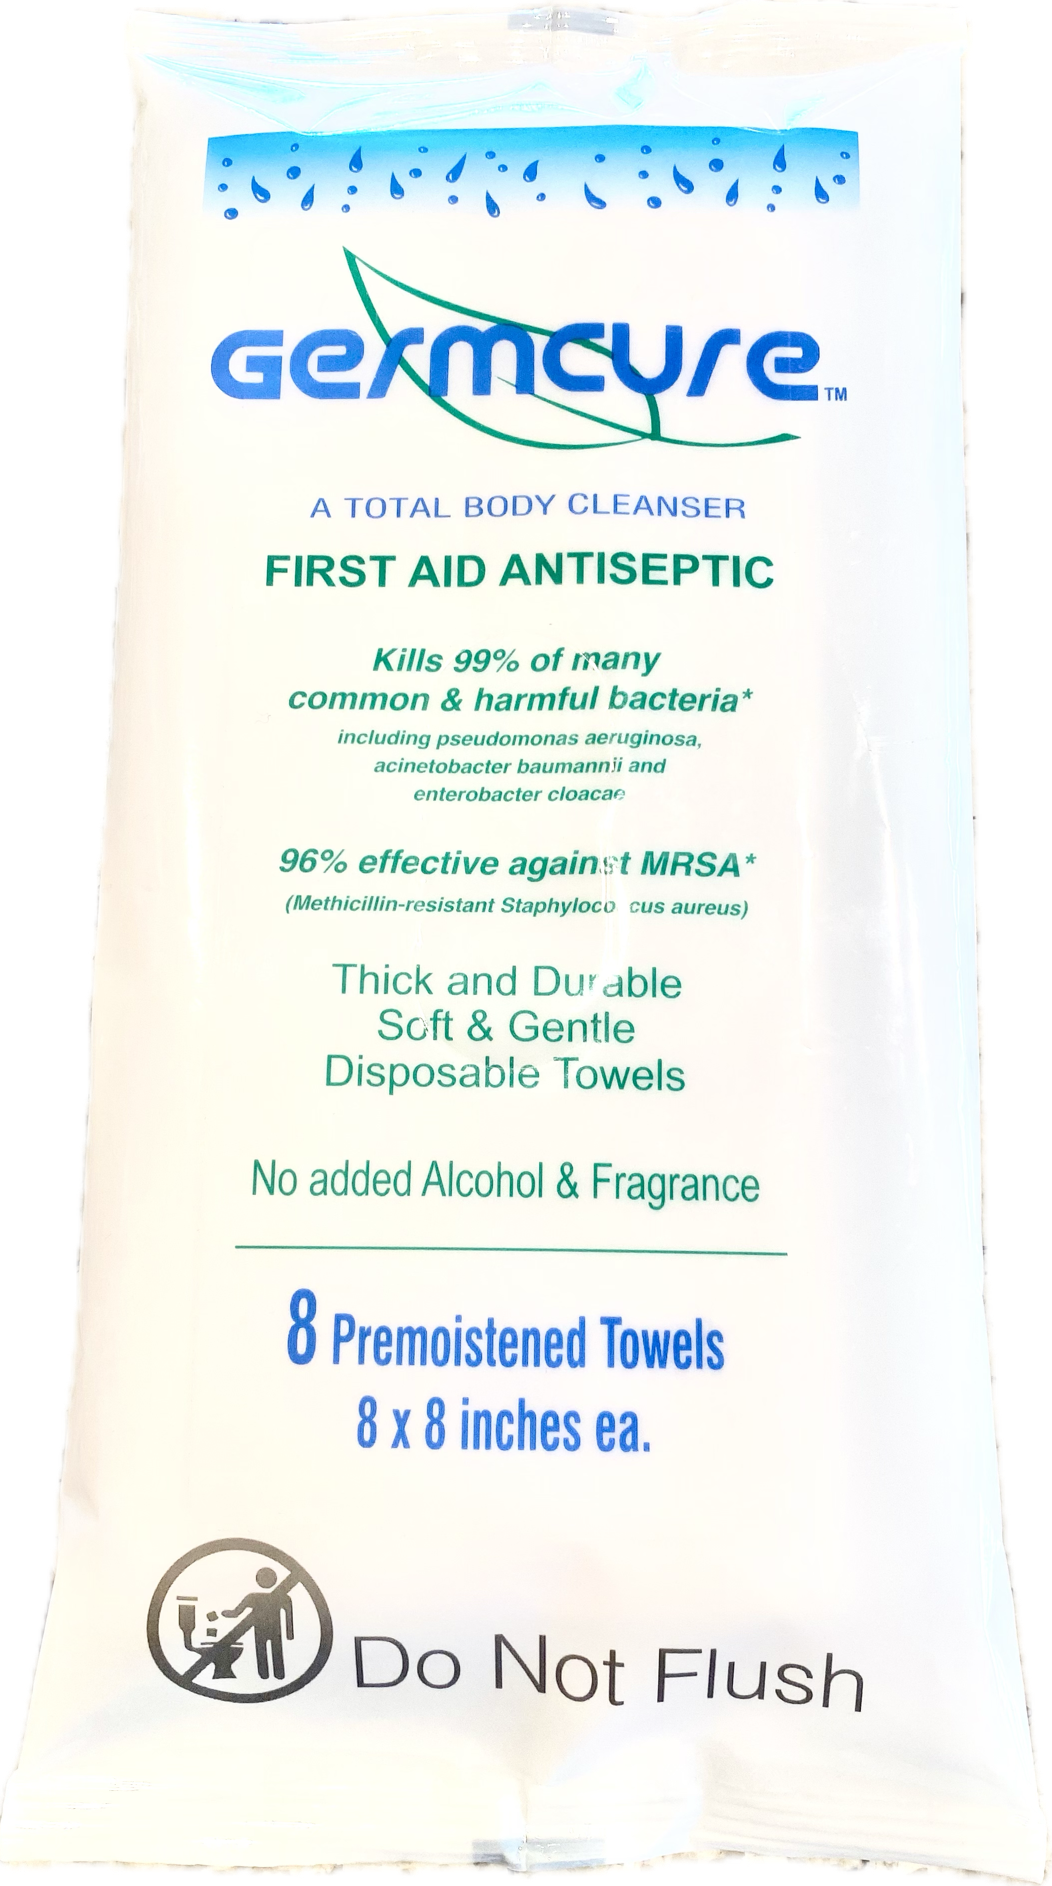 Germcure First Aid Antiseptic Bathing Wipes 8ct (Case of 24)